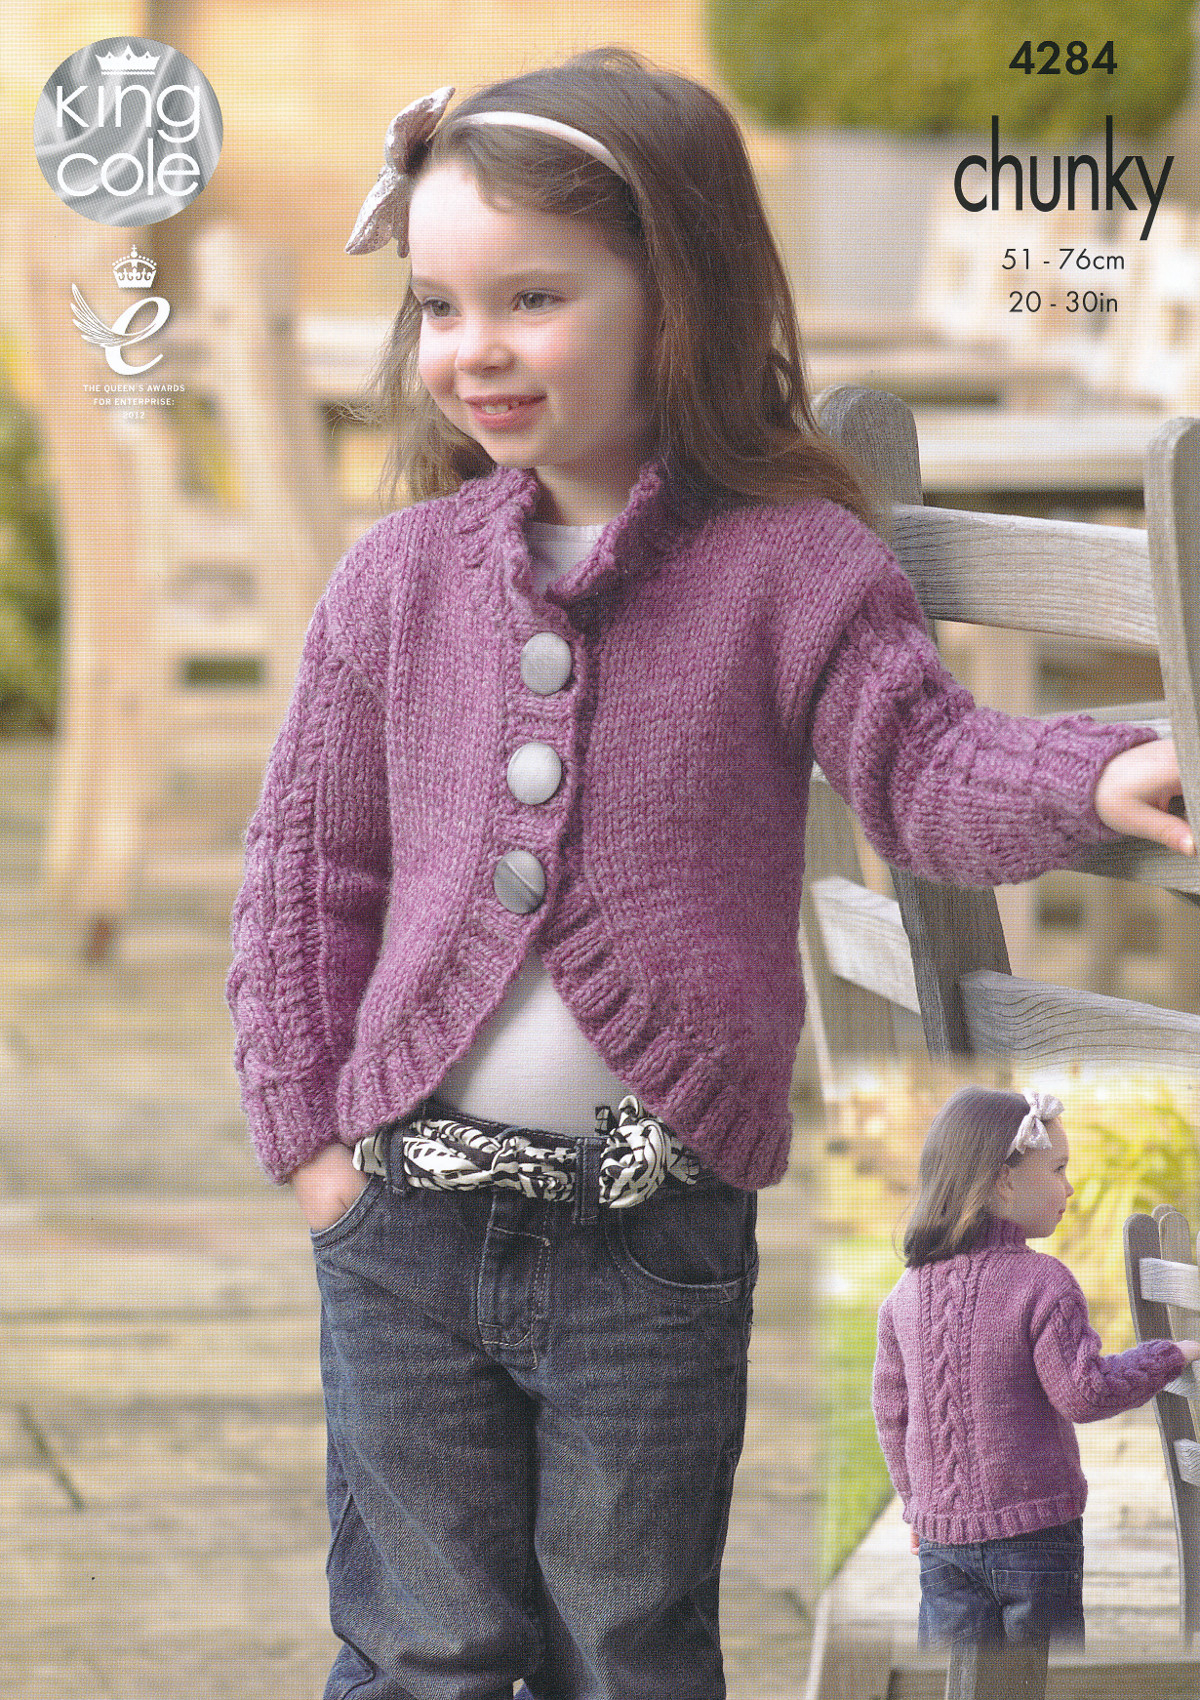 Knitting Patterns For Childrens Sweaters Free Details About Kids Chunky Knitting Pattern King Cole Childrens Collar V Neck Cardigans 4284